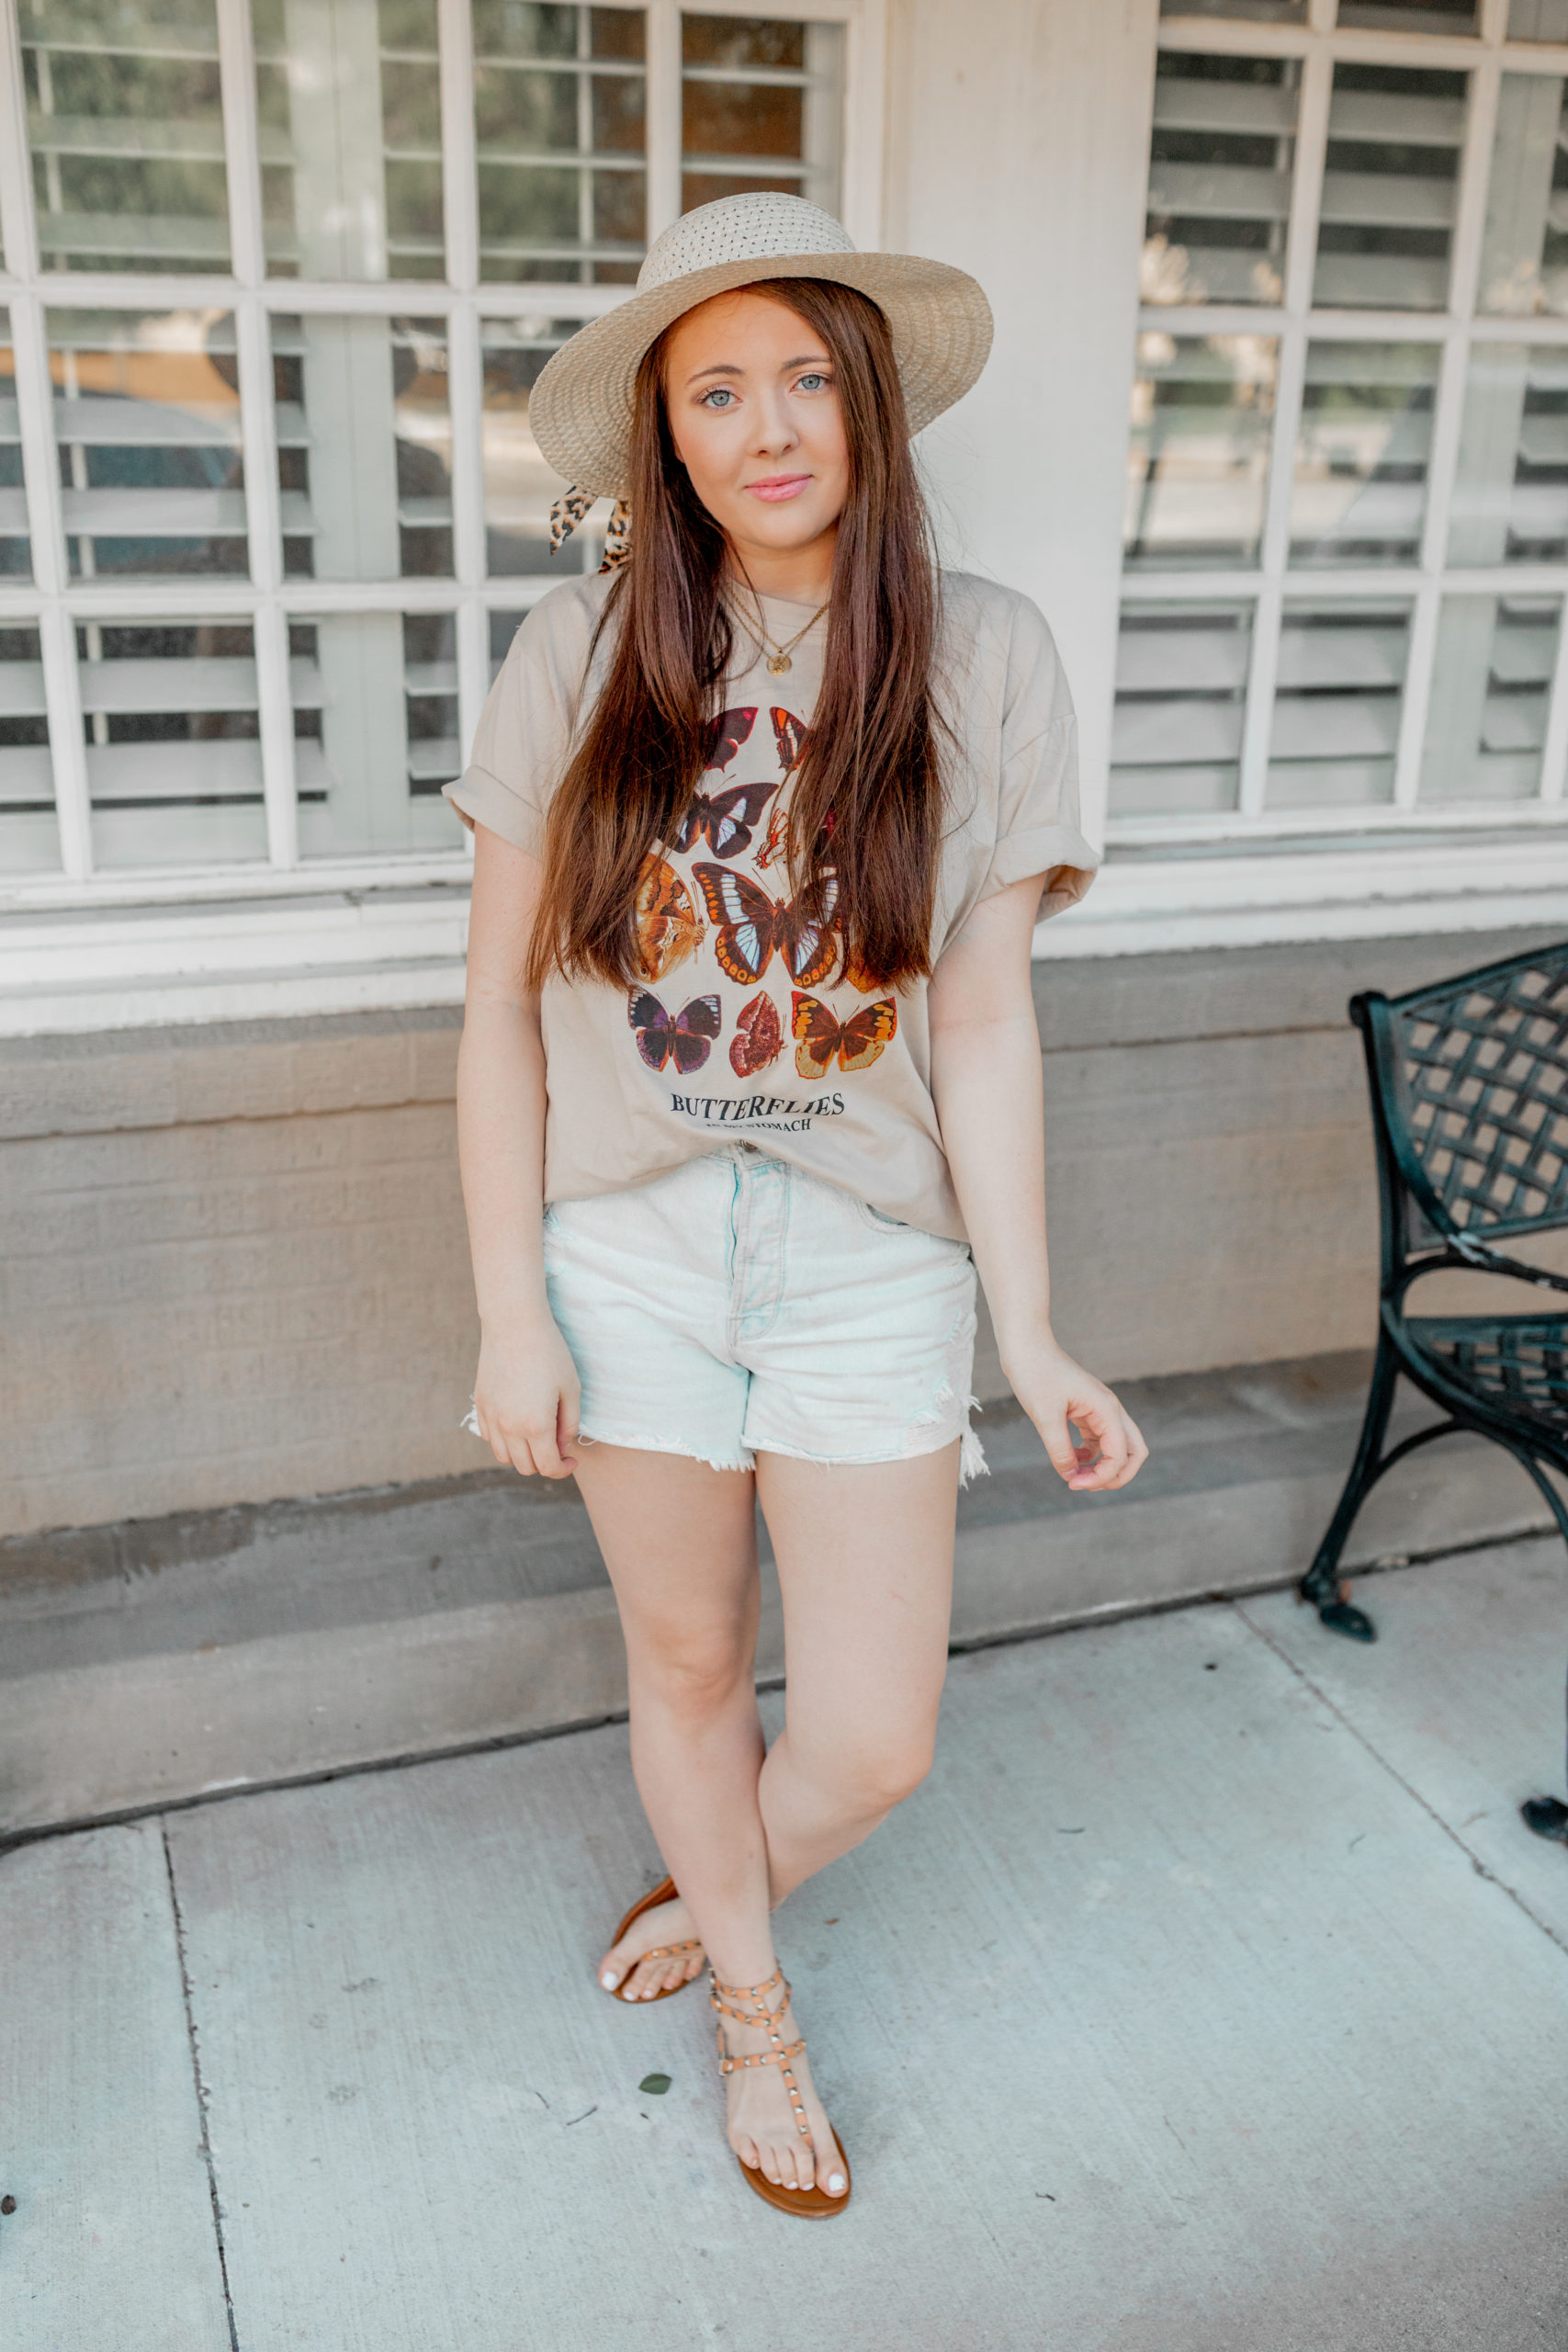 Styling Graphic Tees For Summer! (My Favorites Under $50)